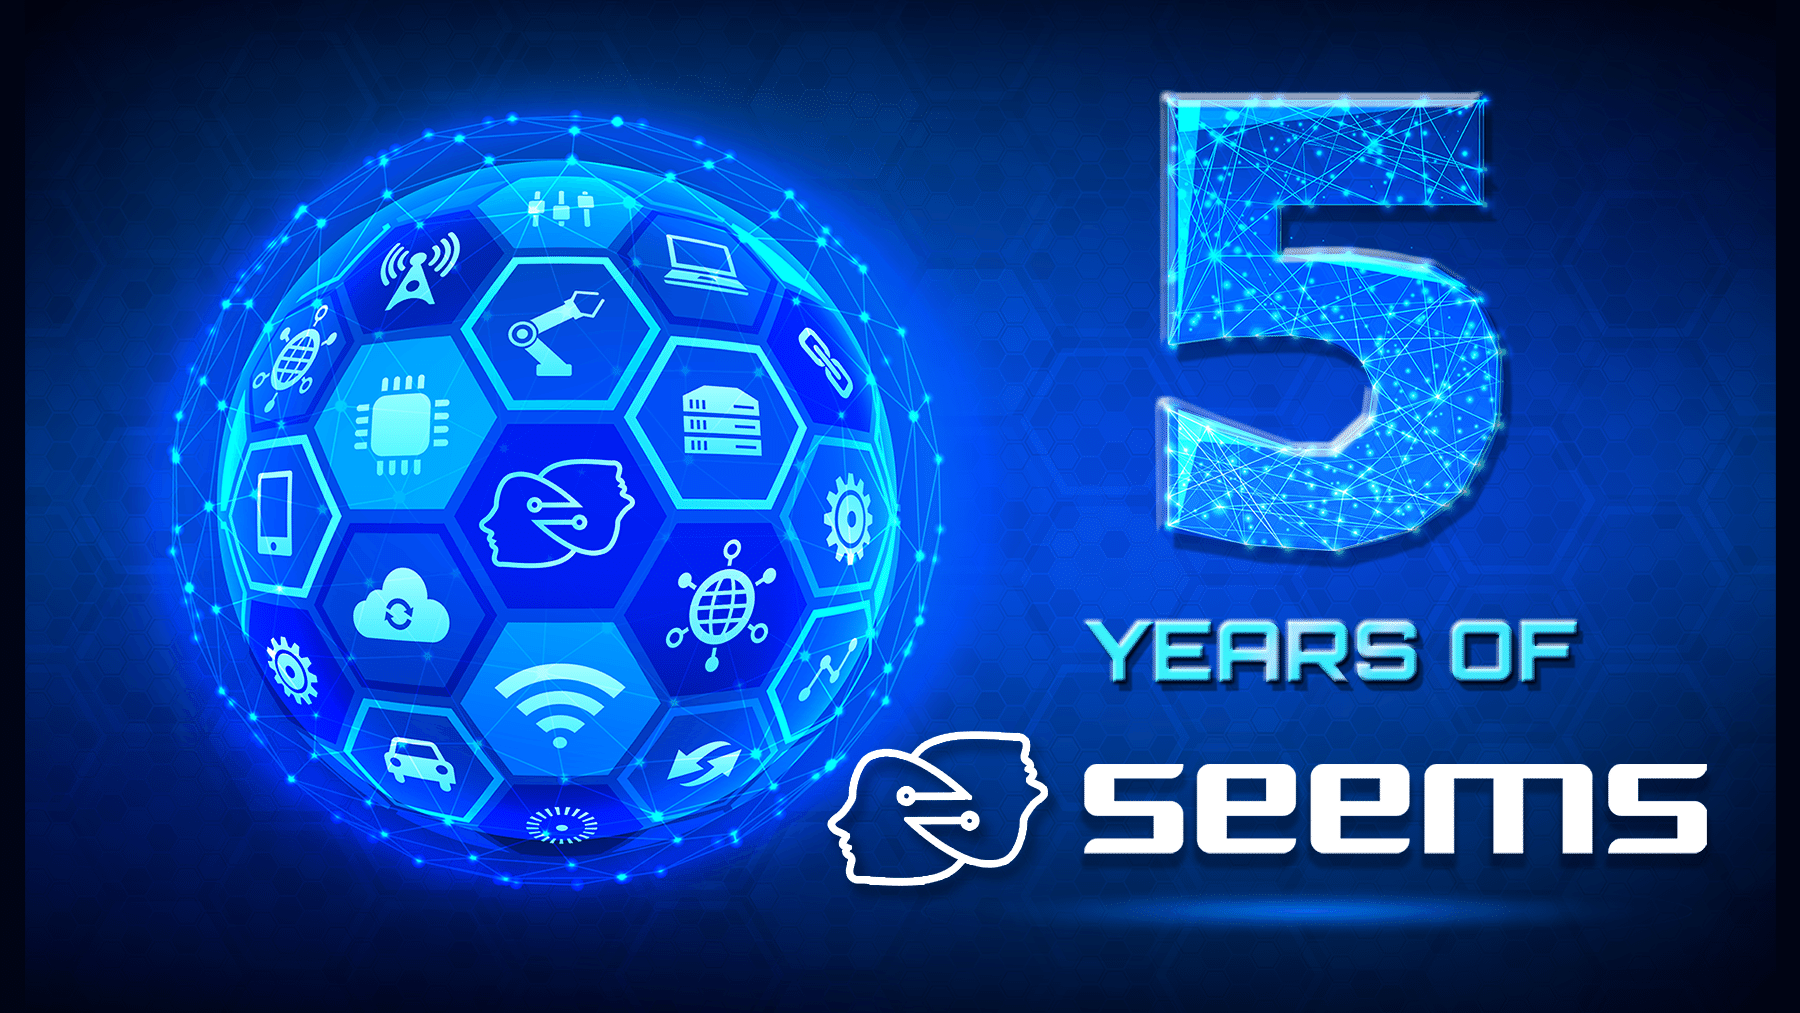 We celebrate 5 years of SEEMS PC